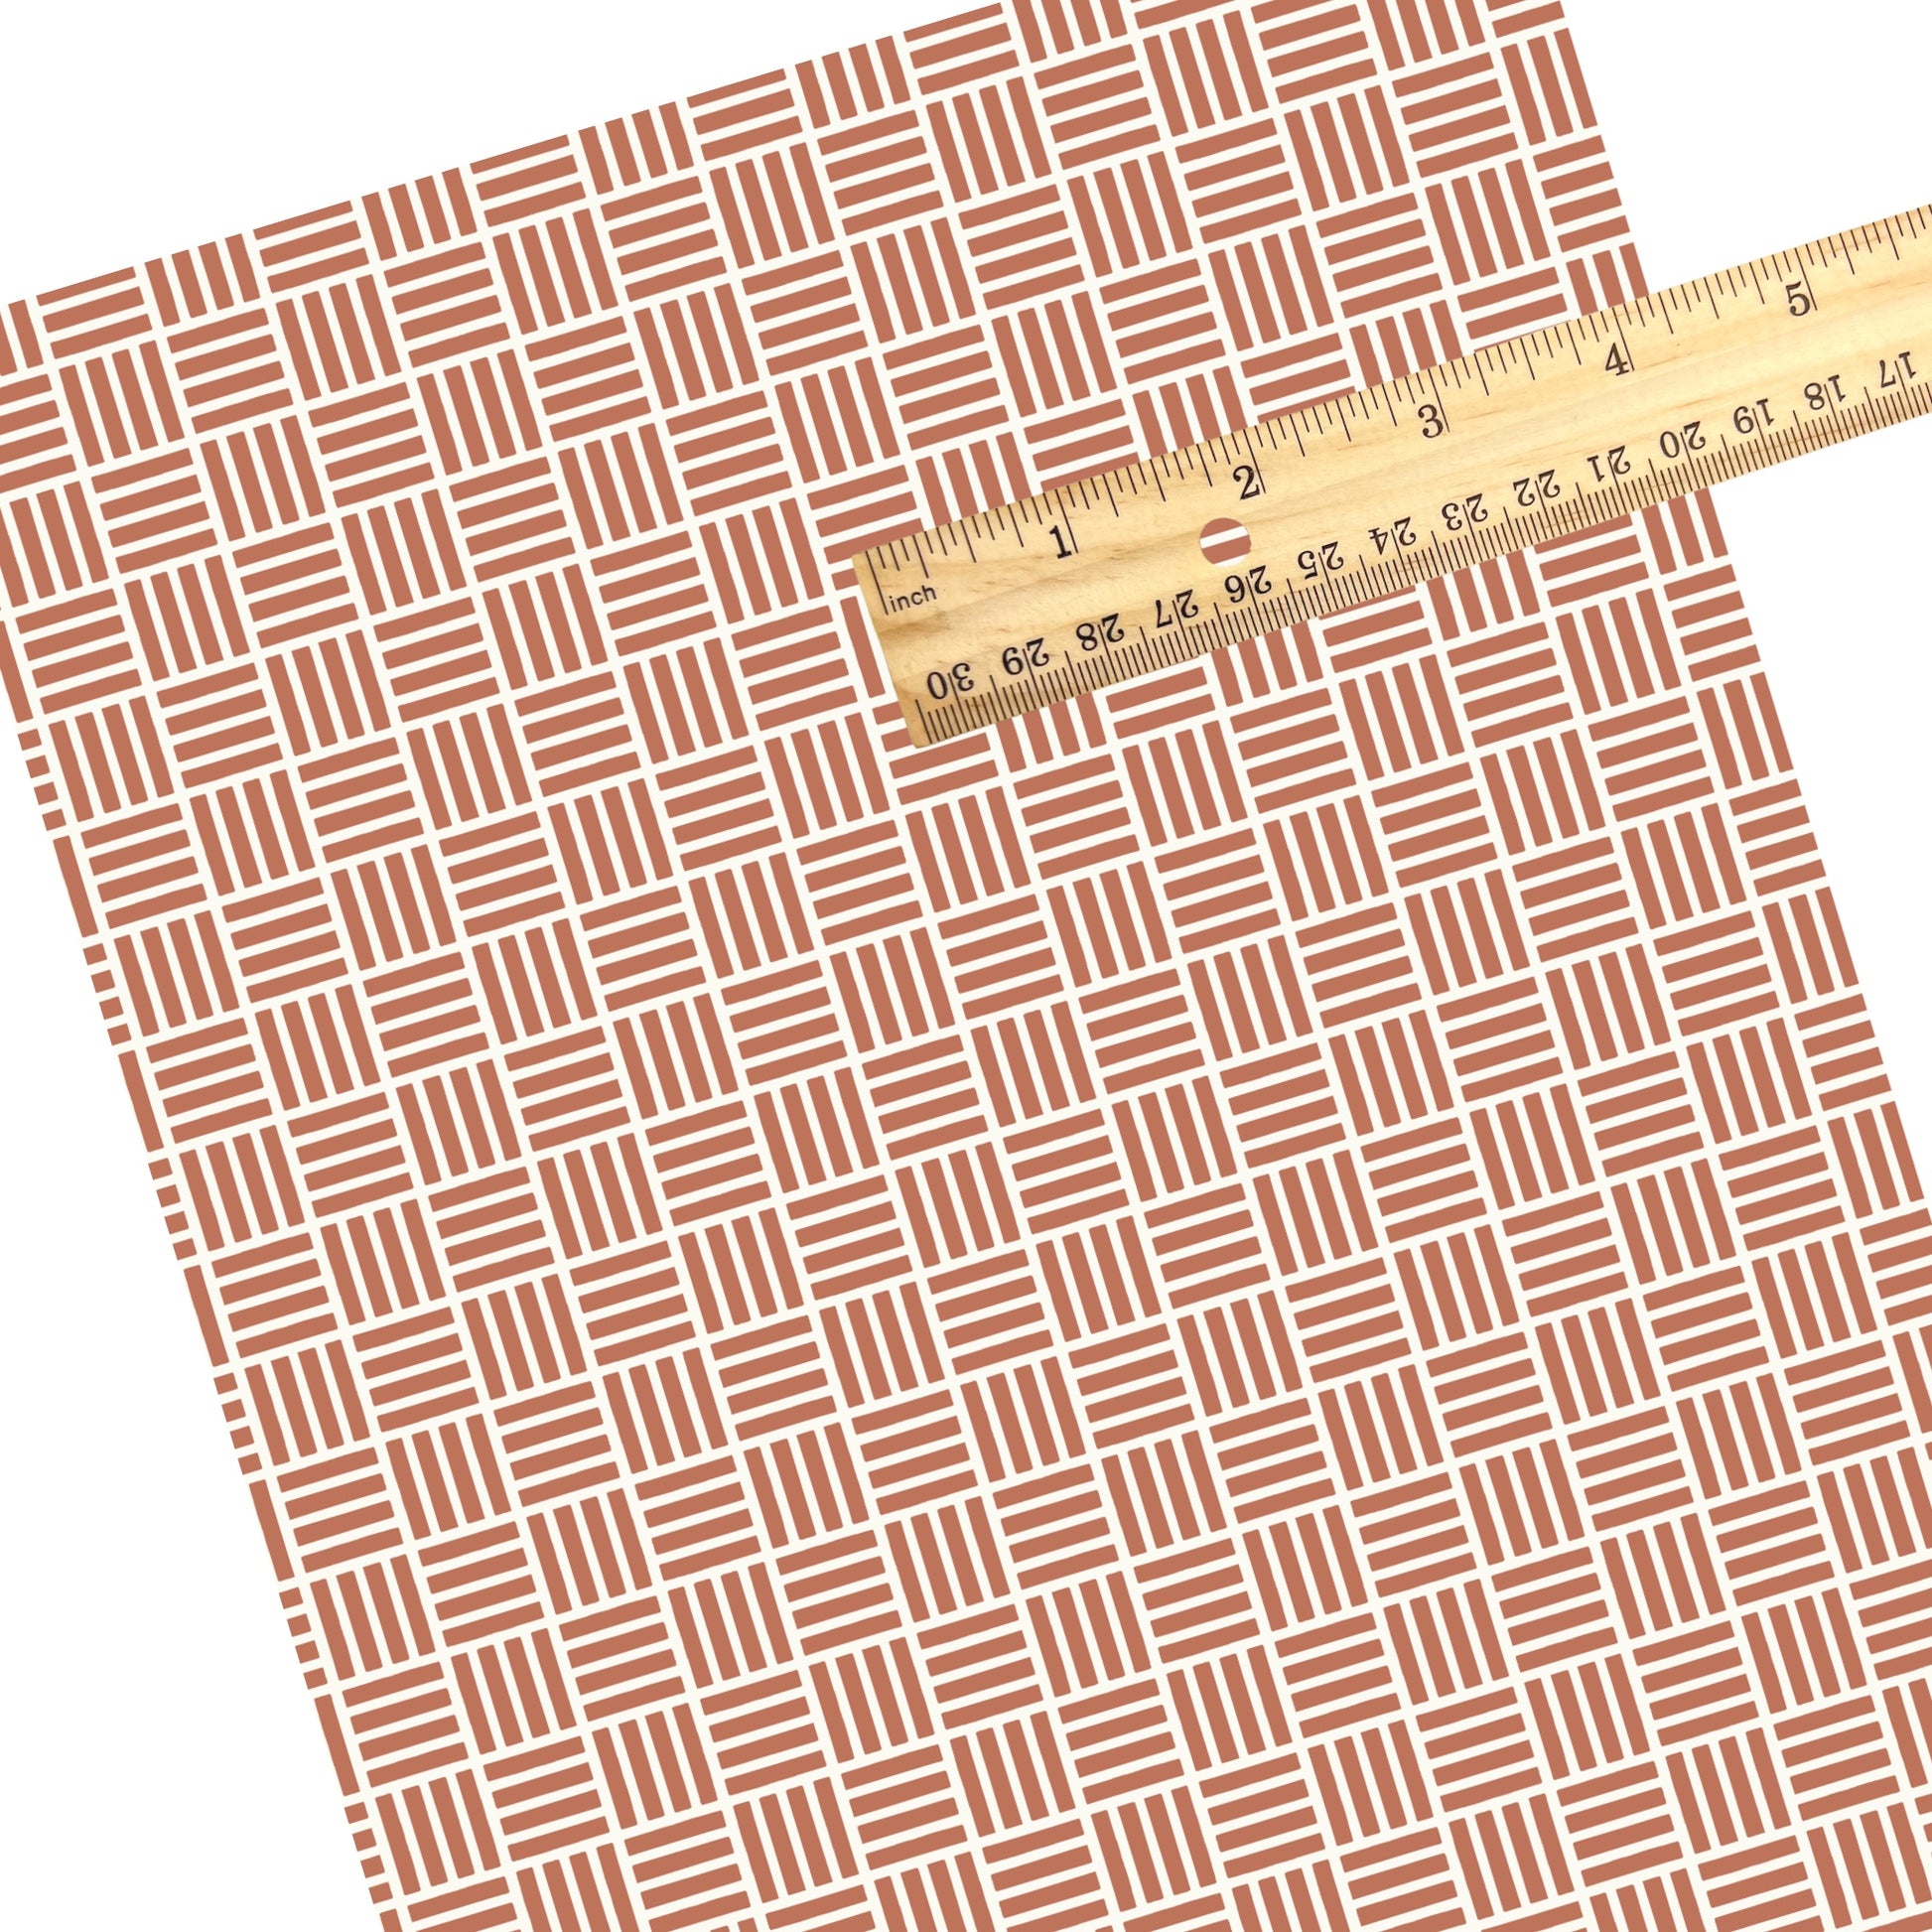 These summer faux leather sheets contain the following design elements: brown and white groove patterns. Our CPSIA compliant faux leather sheets or rolls can be used for all types of crafting projects.